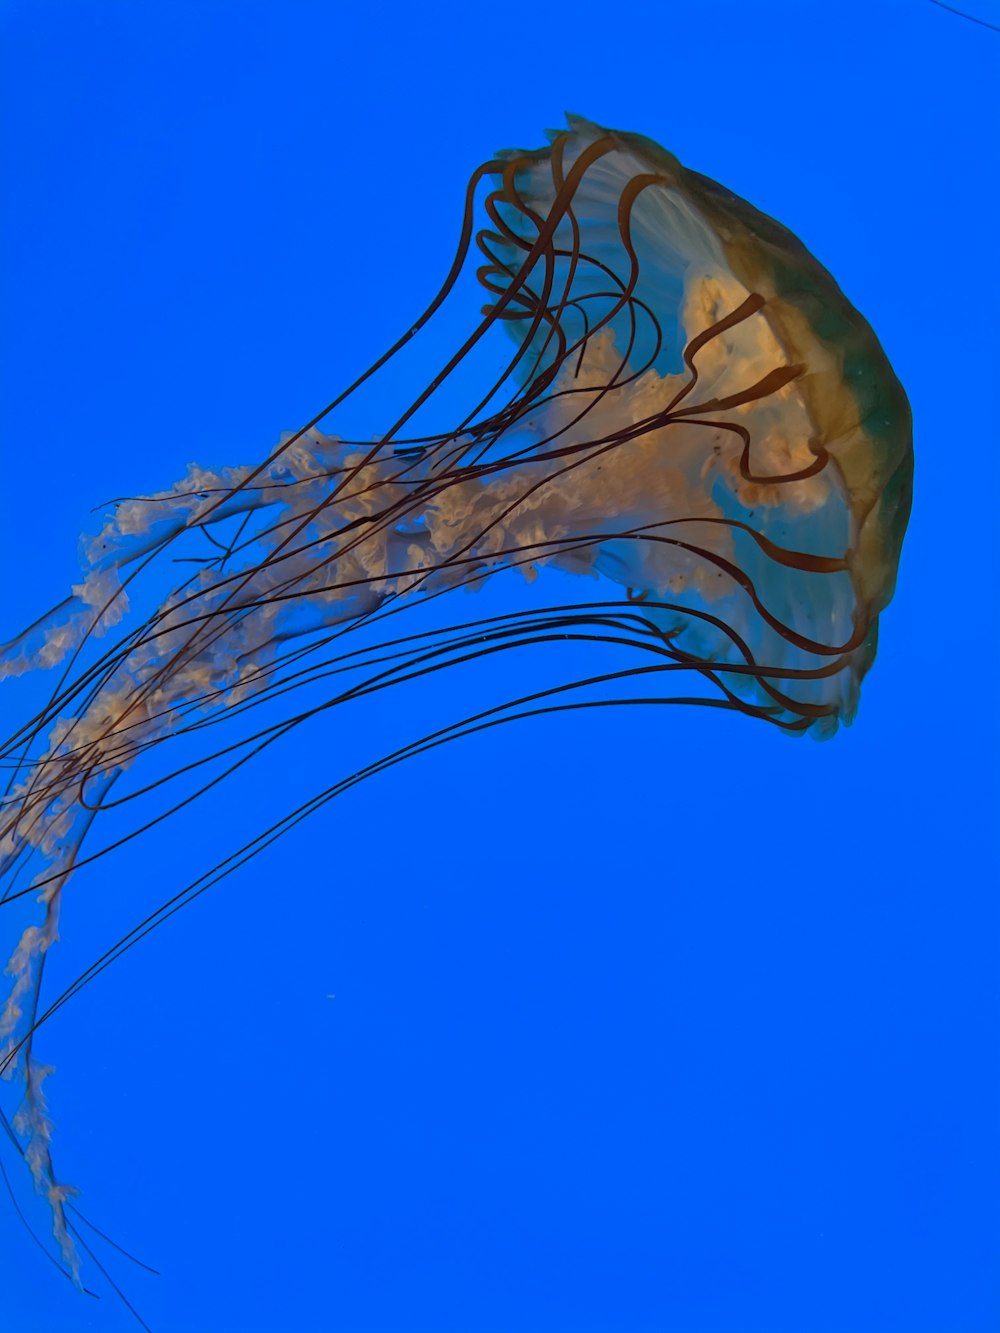 a jellyfish is floating in the blue water